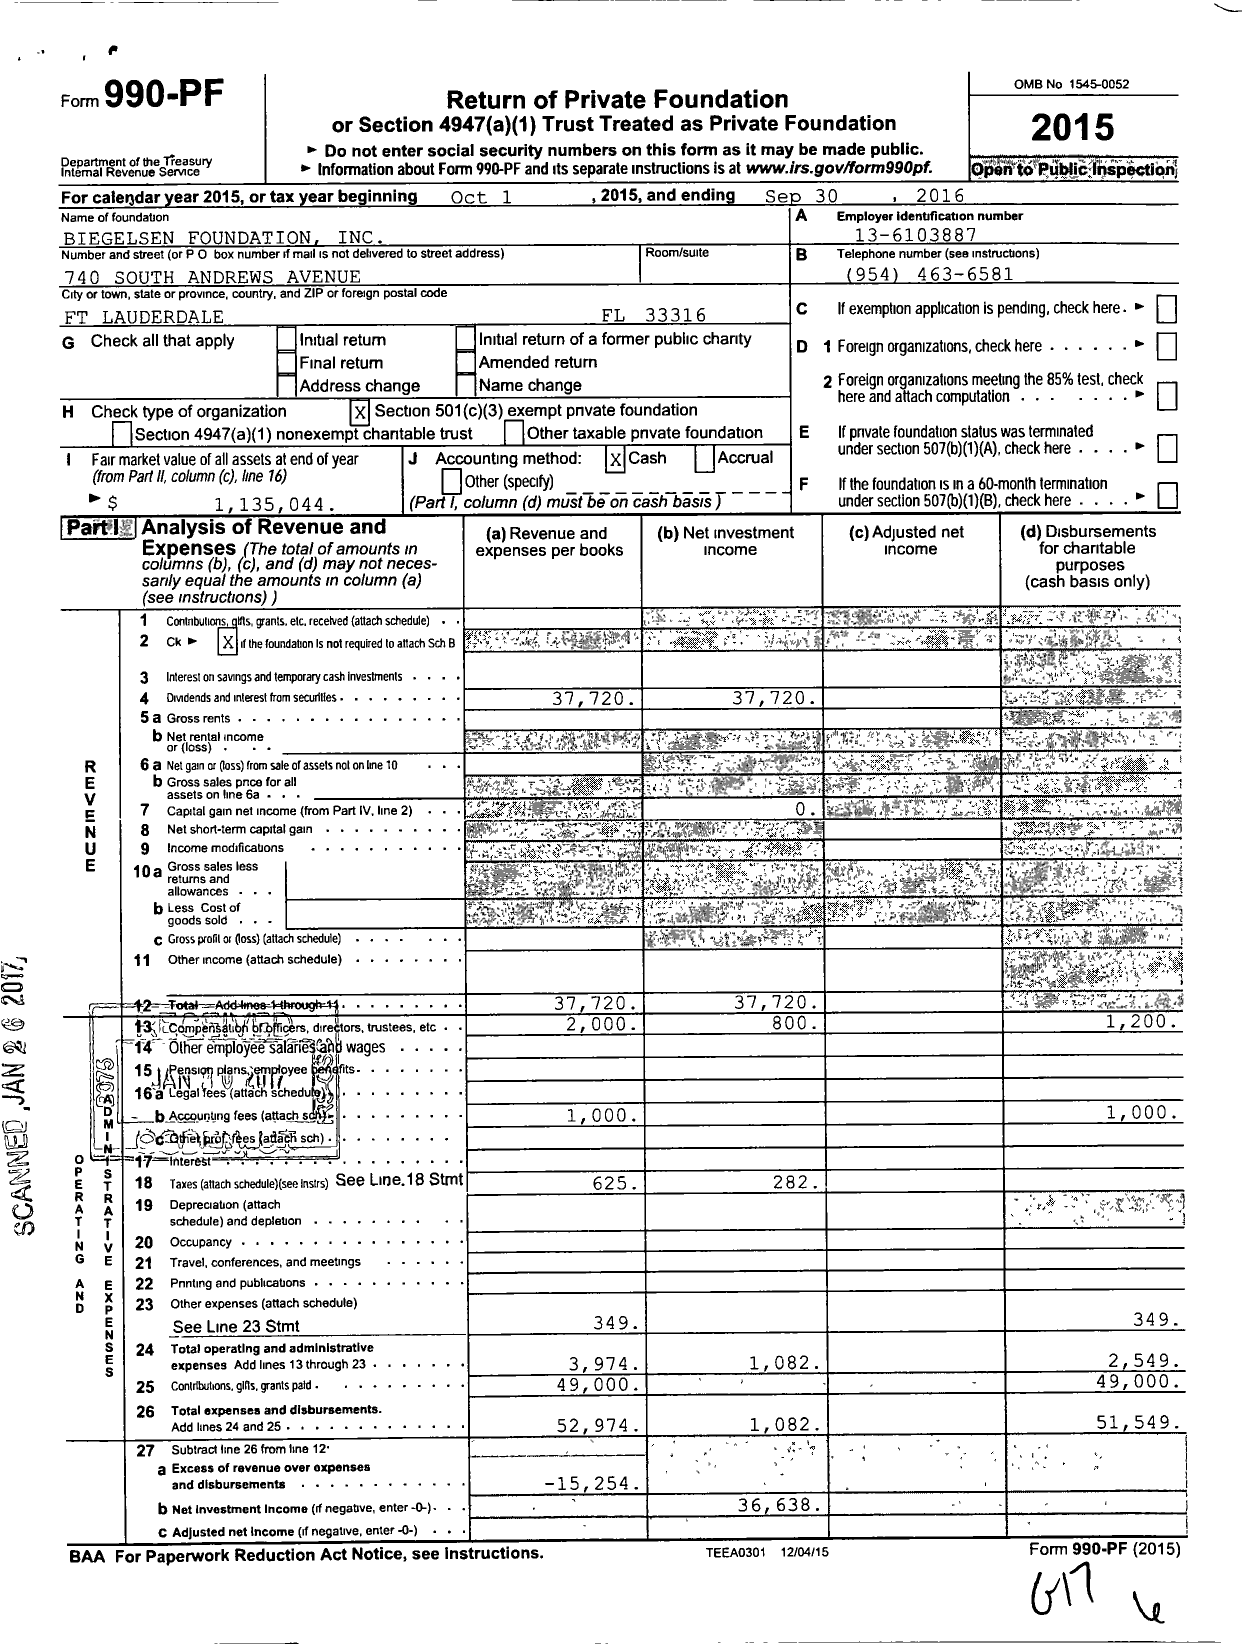 Image of first page of 2015 Form 990PF for Biegelsen Foundation